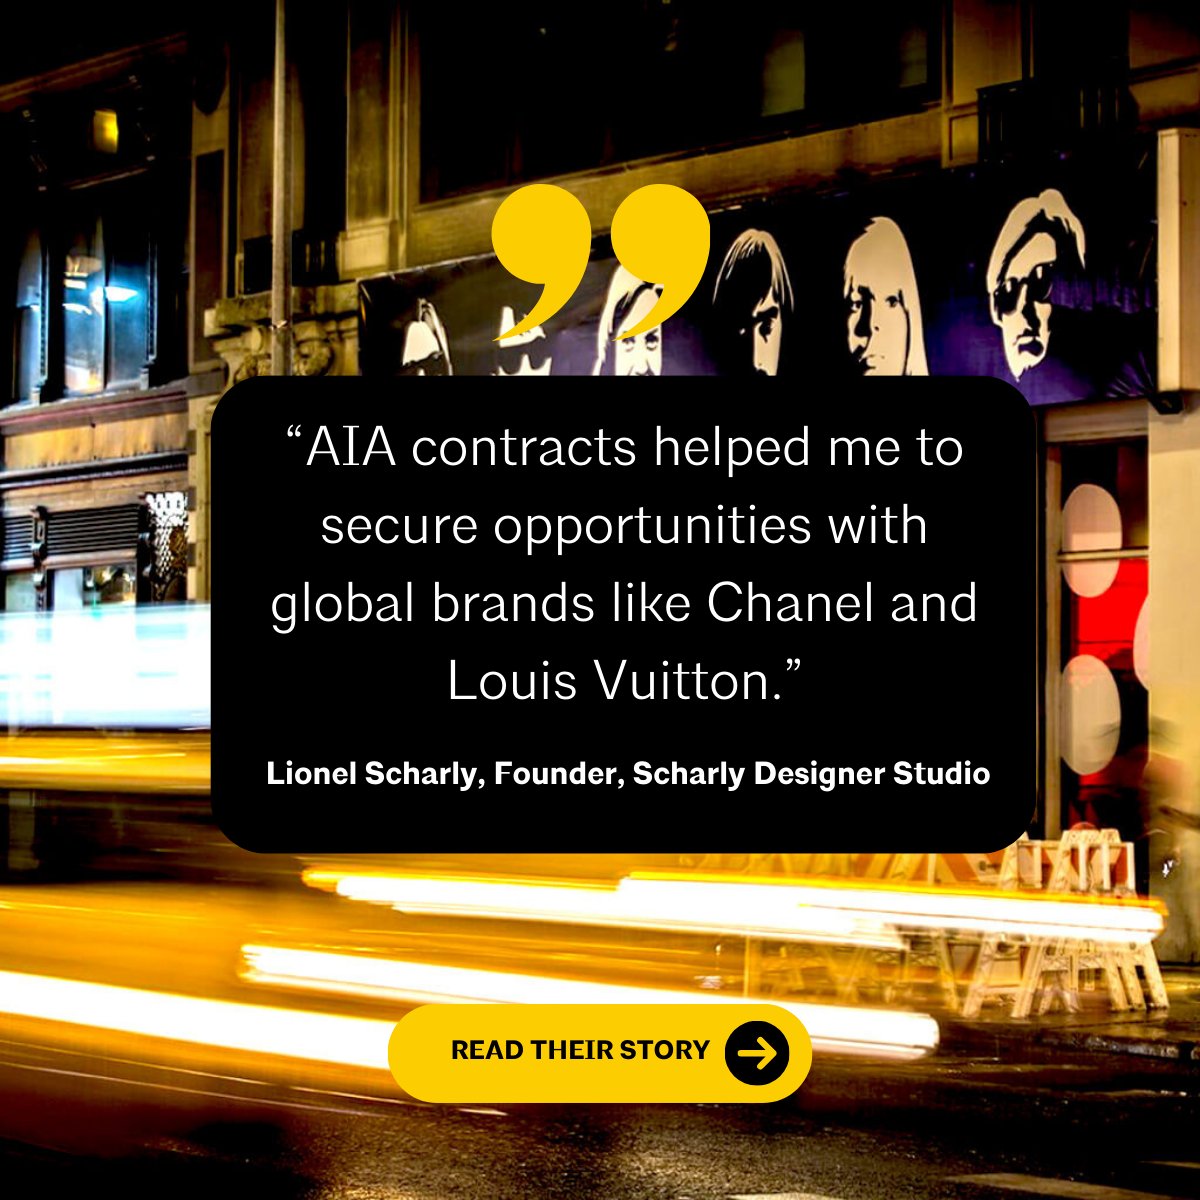 .@scharlydesigner, an award-winning architectural firm in Brooklyn, has been using #AIAcontracts to secure global brands like Chanel and Louis Vuitton. Read their success story: bit.ly/3TaogBg